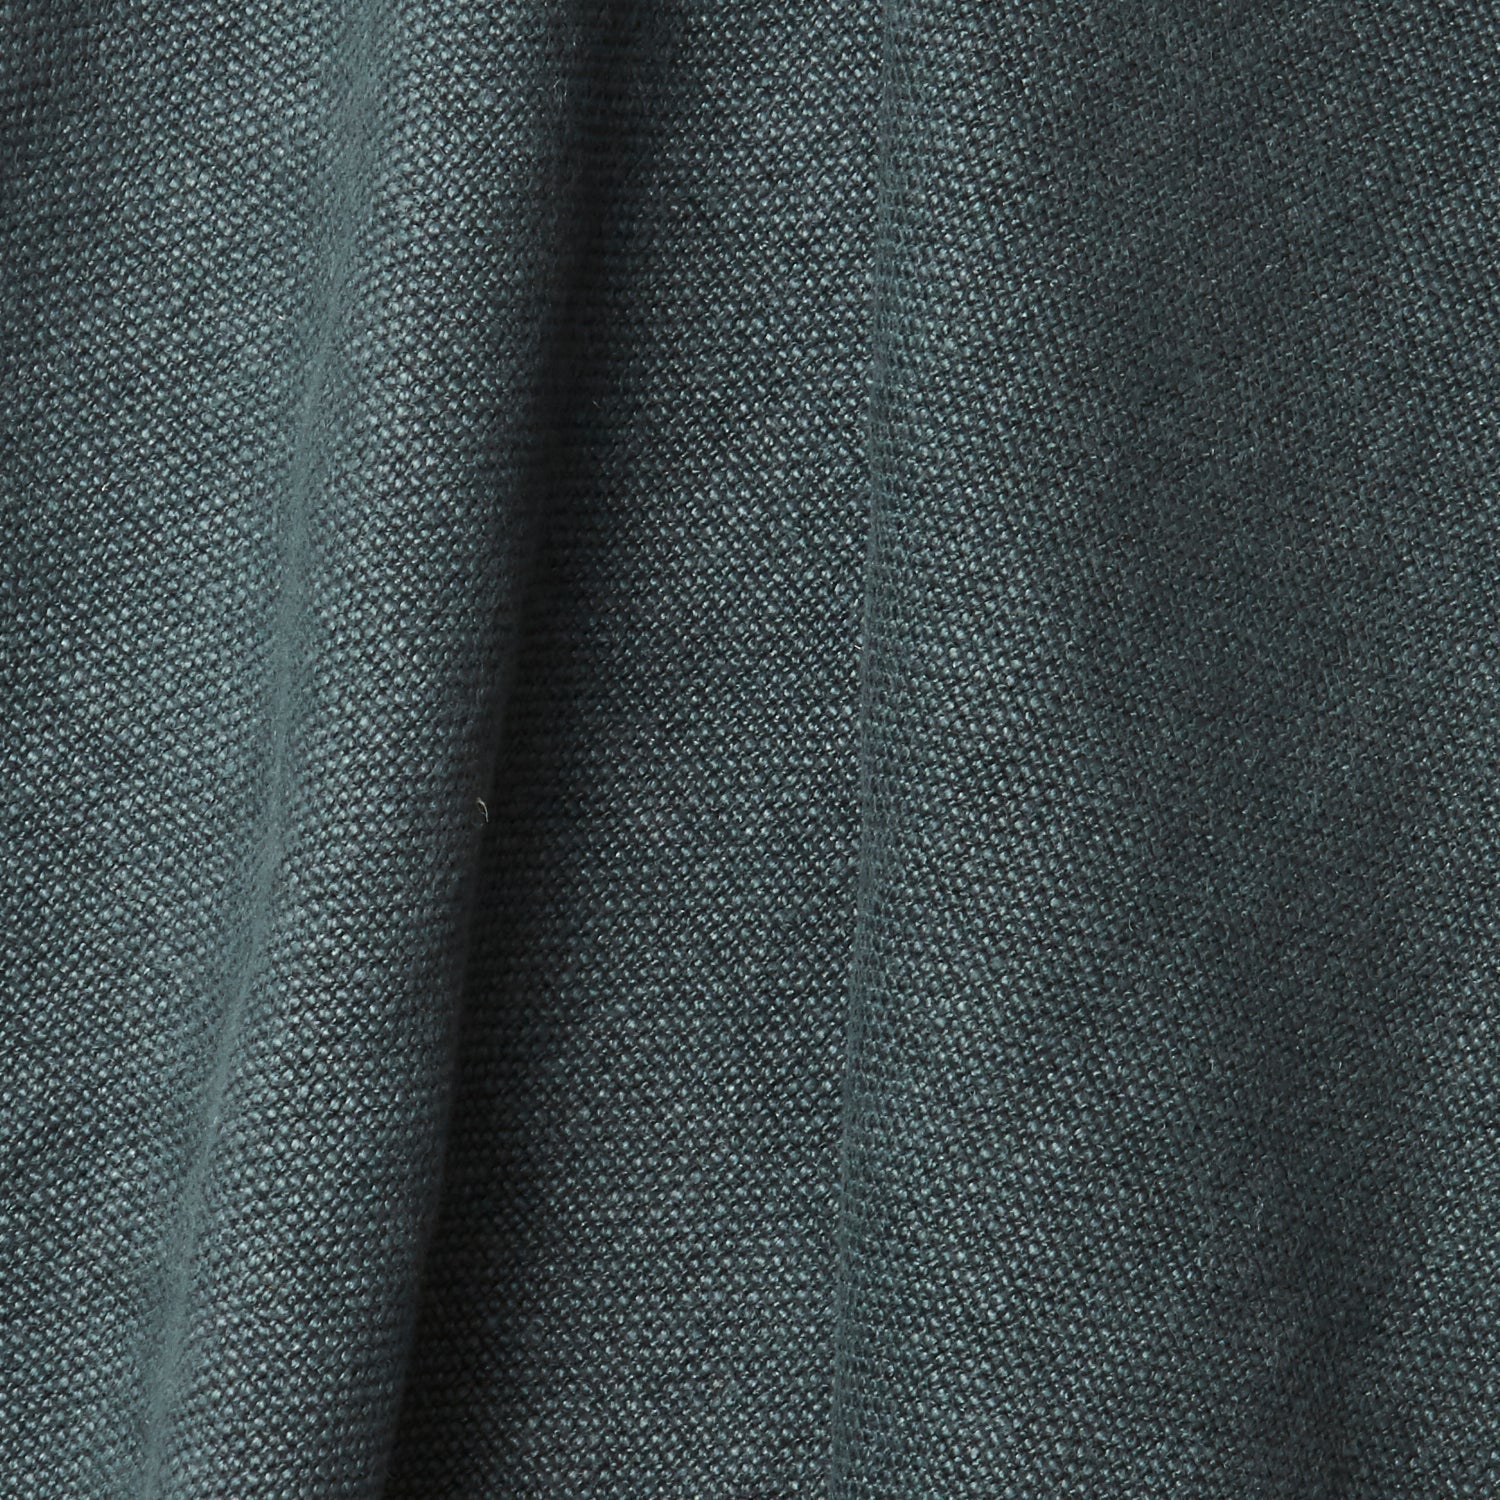 A draped swatch of old-world linen fabric in a solid dark green-gray color.